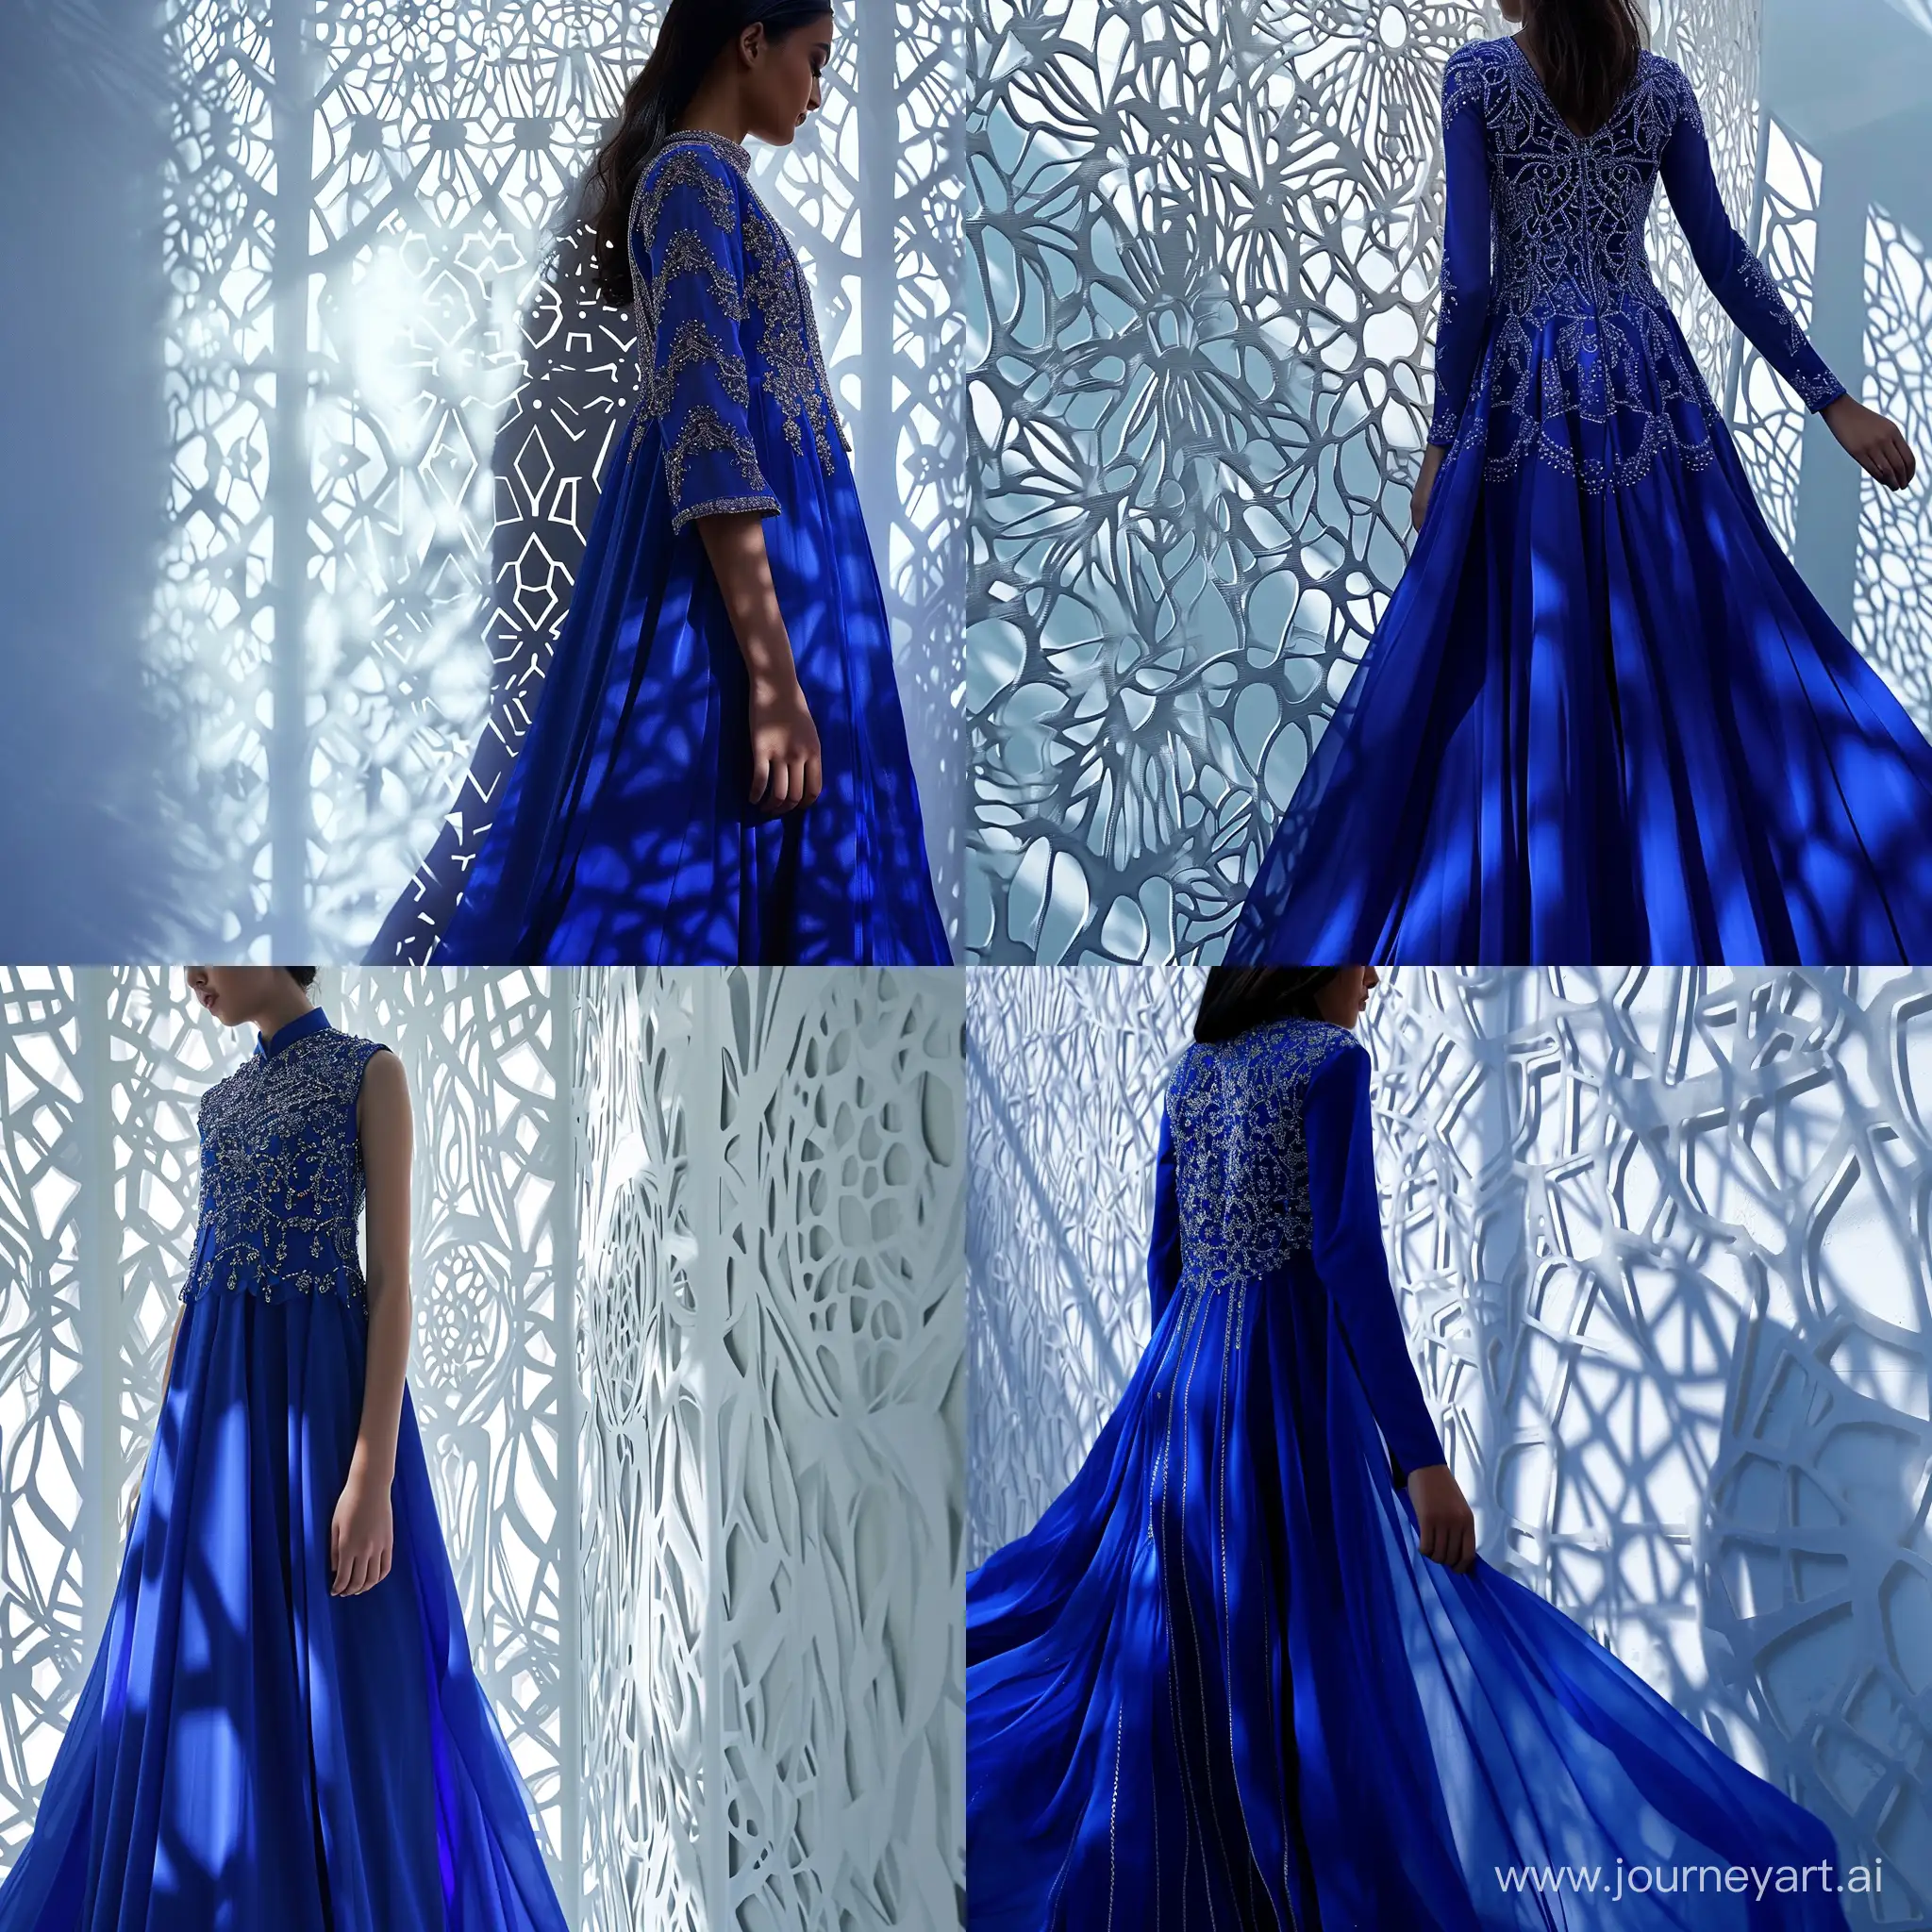 a girl wearing a stunning royal blue dress with intricate stitching and design elements on the bodice. The dress is long and flows down to the floor, creating a contrast with the white wall behind, the wall or partition behind the girl has a complex pattern of geometric cut-outs, creating a lace-like effect. The wall is white and reflects the natural light, creating a bright and airy atmosphere,  the image is illuminated by a soft natural light, which casts gentle shadows and highlights the textures of the dress and wall. The light creates a warm and inviting mood, as well as a sense of depth and dimension